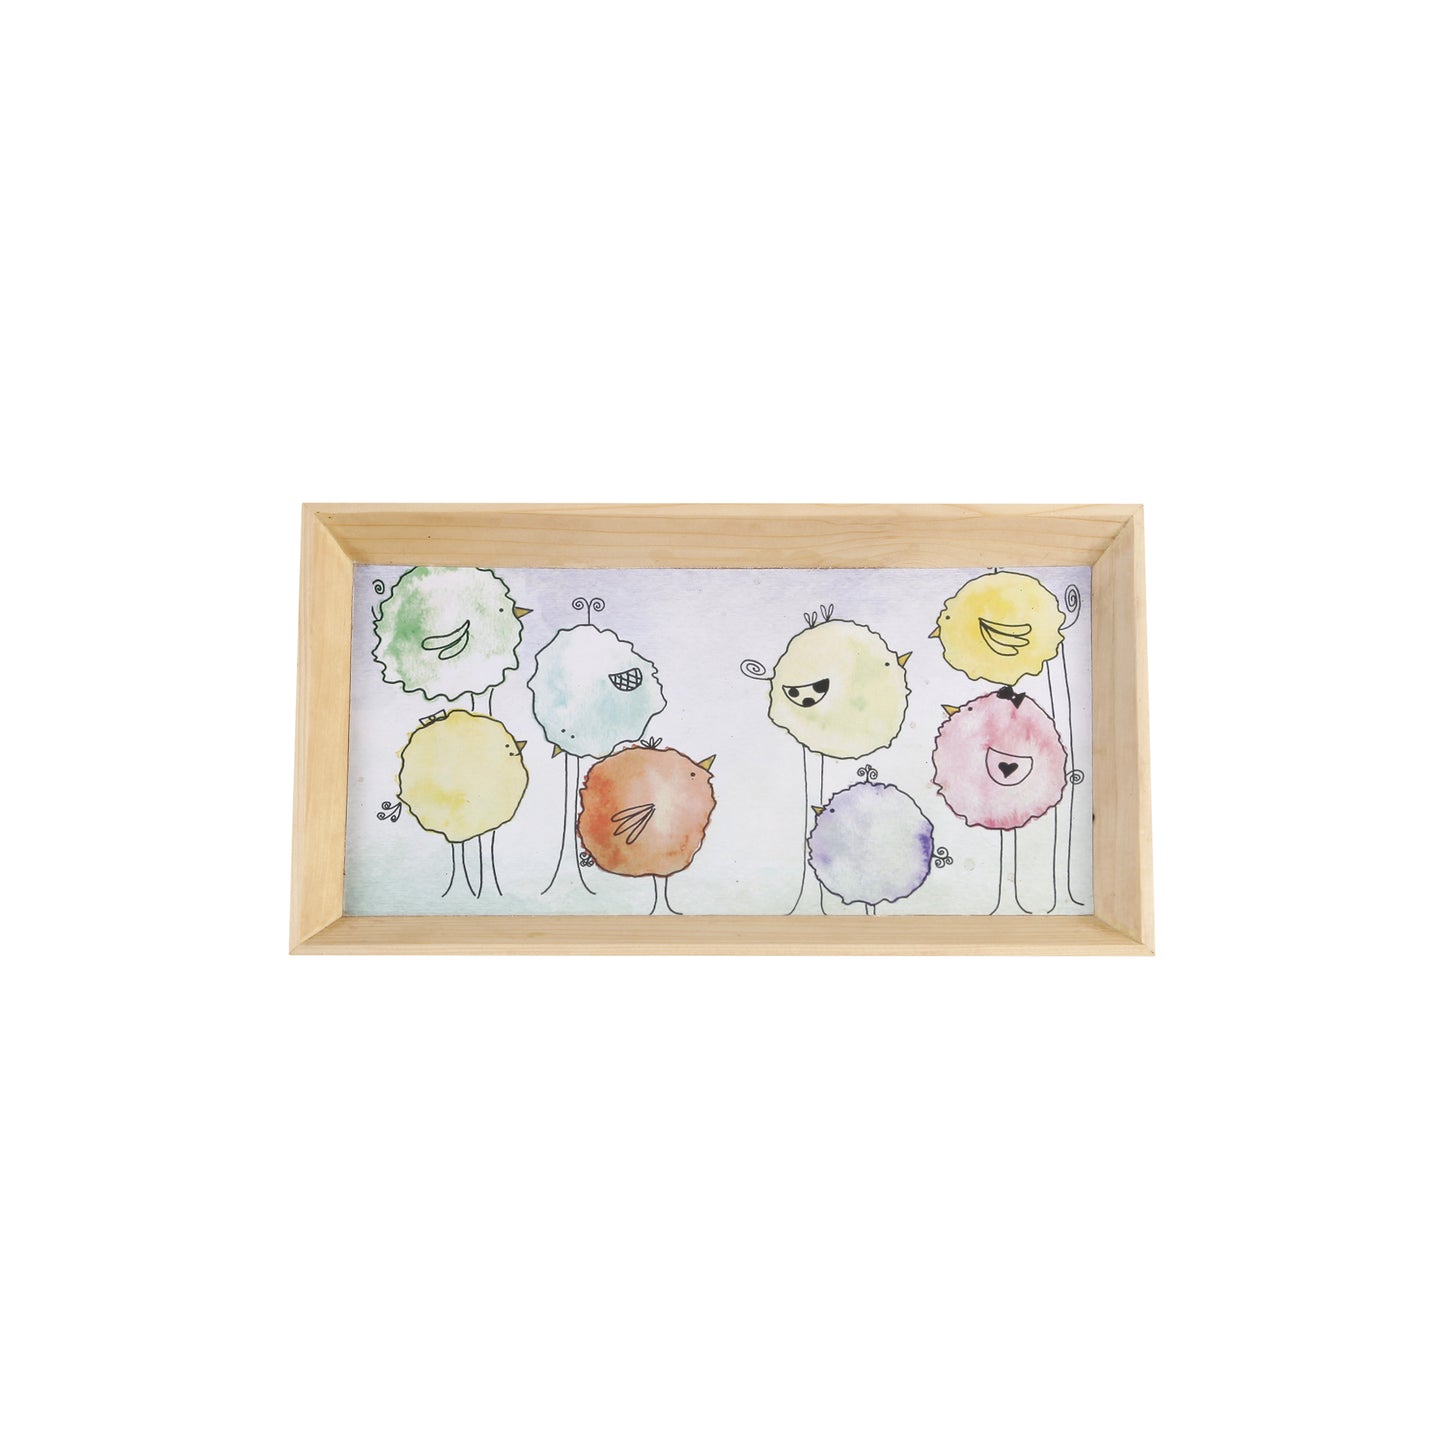 A Tiny Mistake Floral Caricature Birds Rectangle Wooden Serving Tray, 35 x 20 x 2 cm